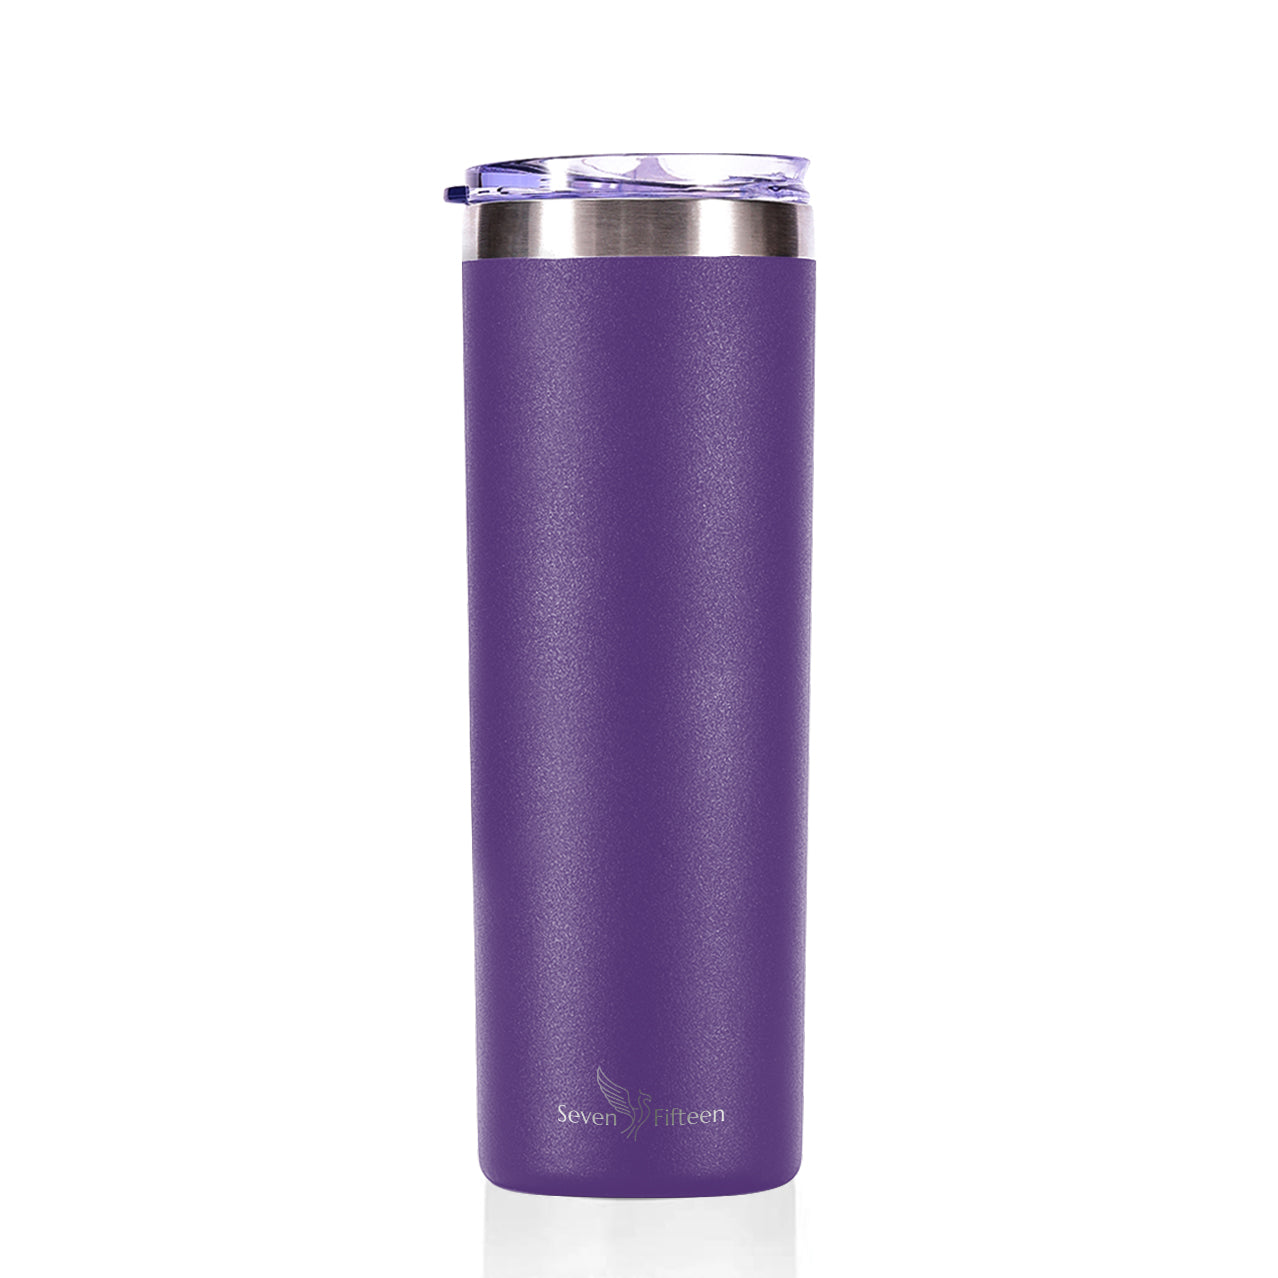 CusCosCes Personalized Tumbler with Handle and Folded Straw, 30oz Hydro  Flask Water Bottles Insulate…See more CusCosCes Personalized Tumbler with